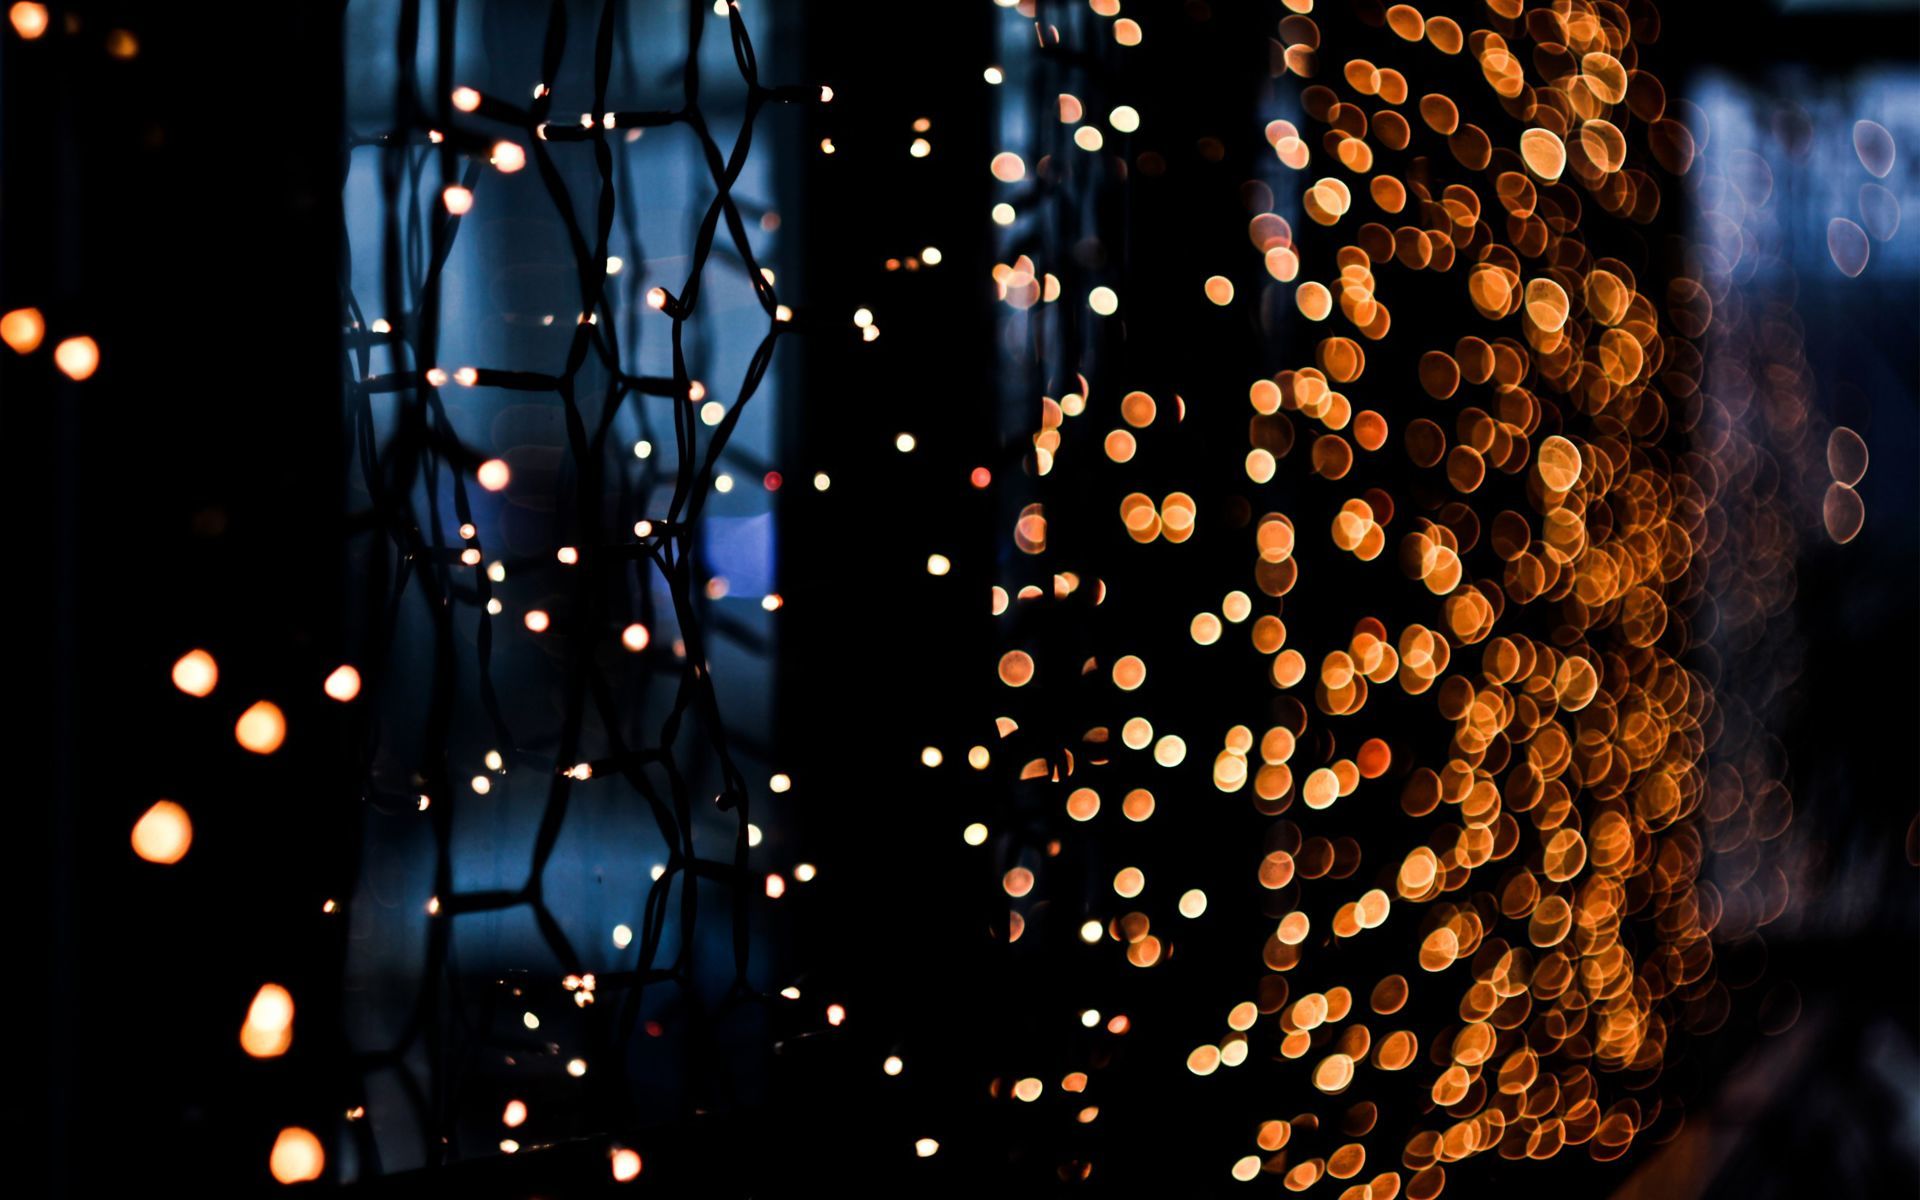 Out of Focus Wallpaper 37917 1920x1200 px. Christmas lights wallpaper, Bokeh wallpaper, Lit wallpaper